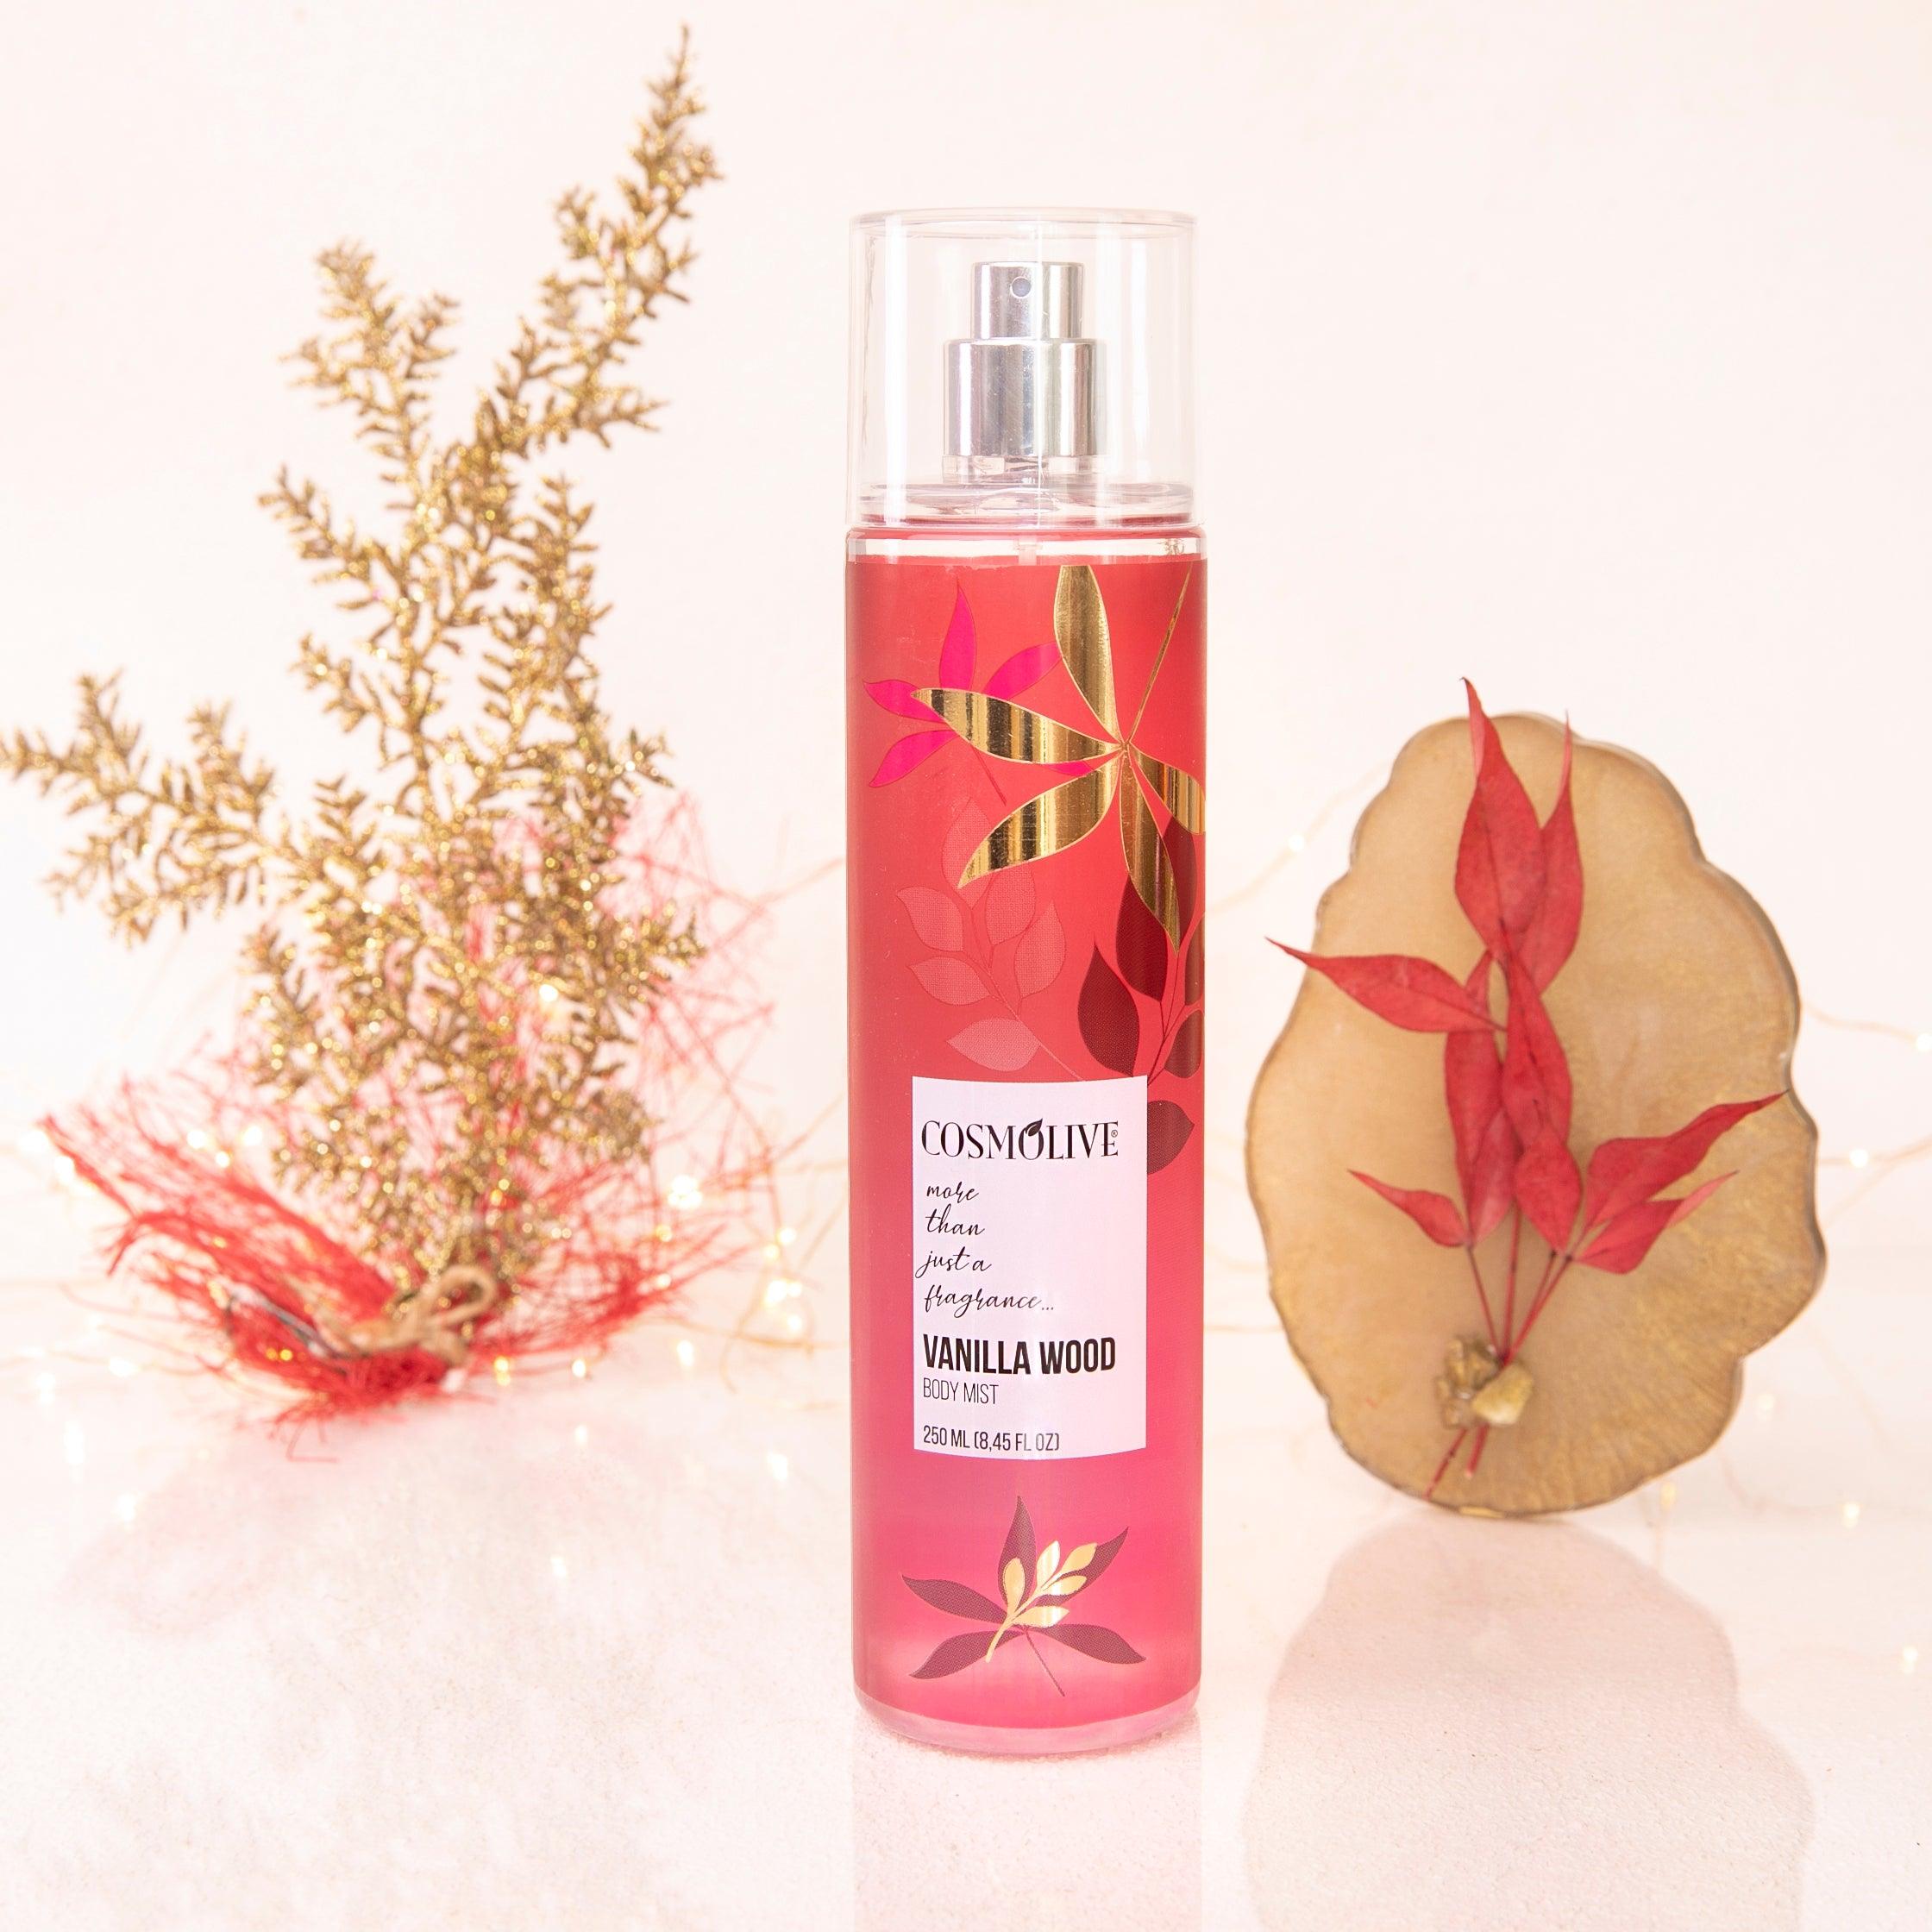 COSMOLIVE BODY MIST 250 ml Vanilla Wood / The Excellent Composition of Nature With The Fruit and Floral Essences / Natural Life - Natural Bazaar